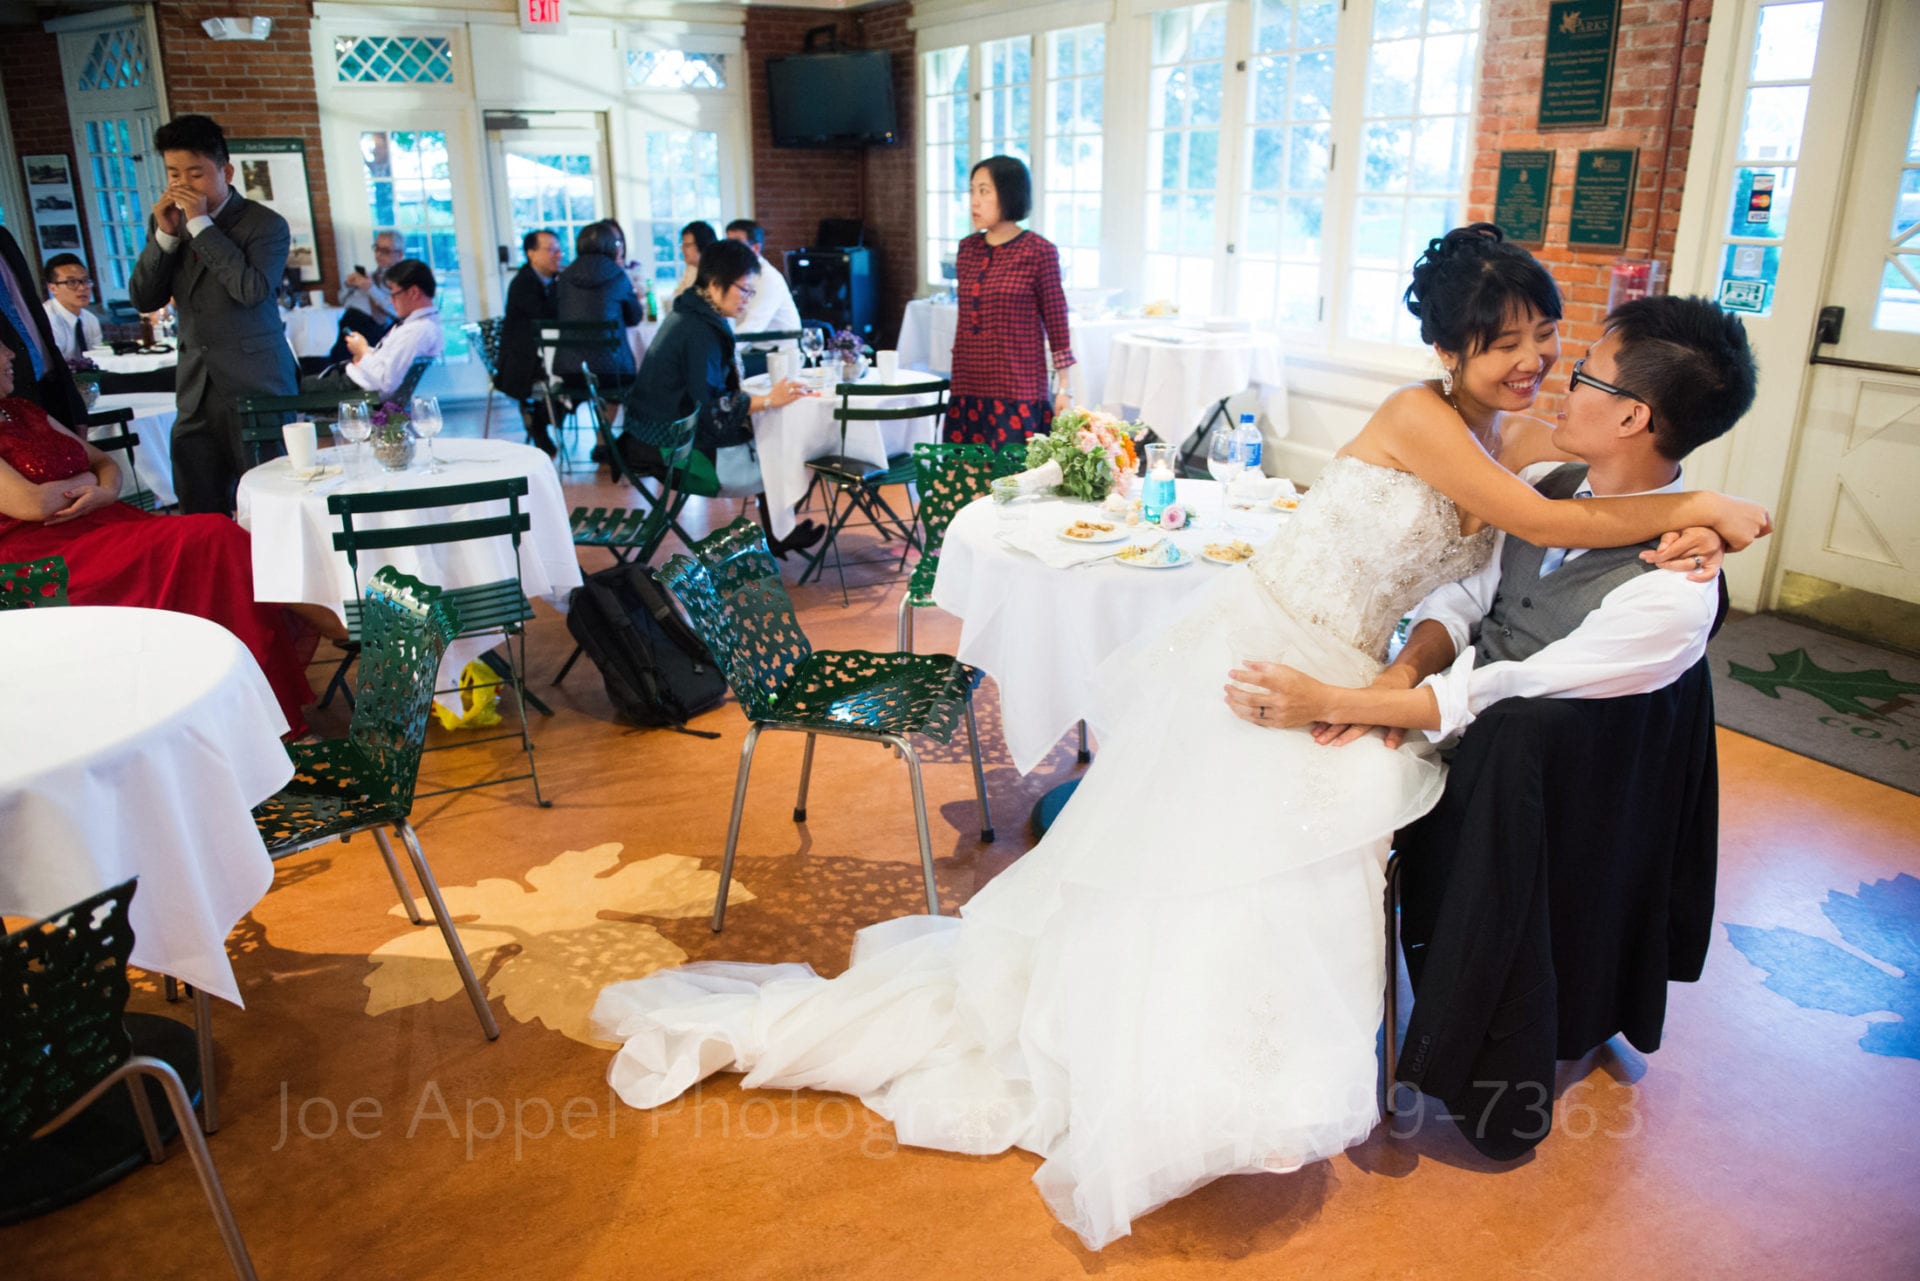 a bride sits on her grooms lap and smiles at him during their wedding reception at the schenley park cafe and visitors center.